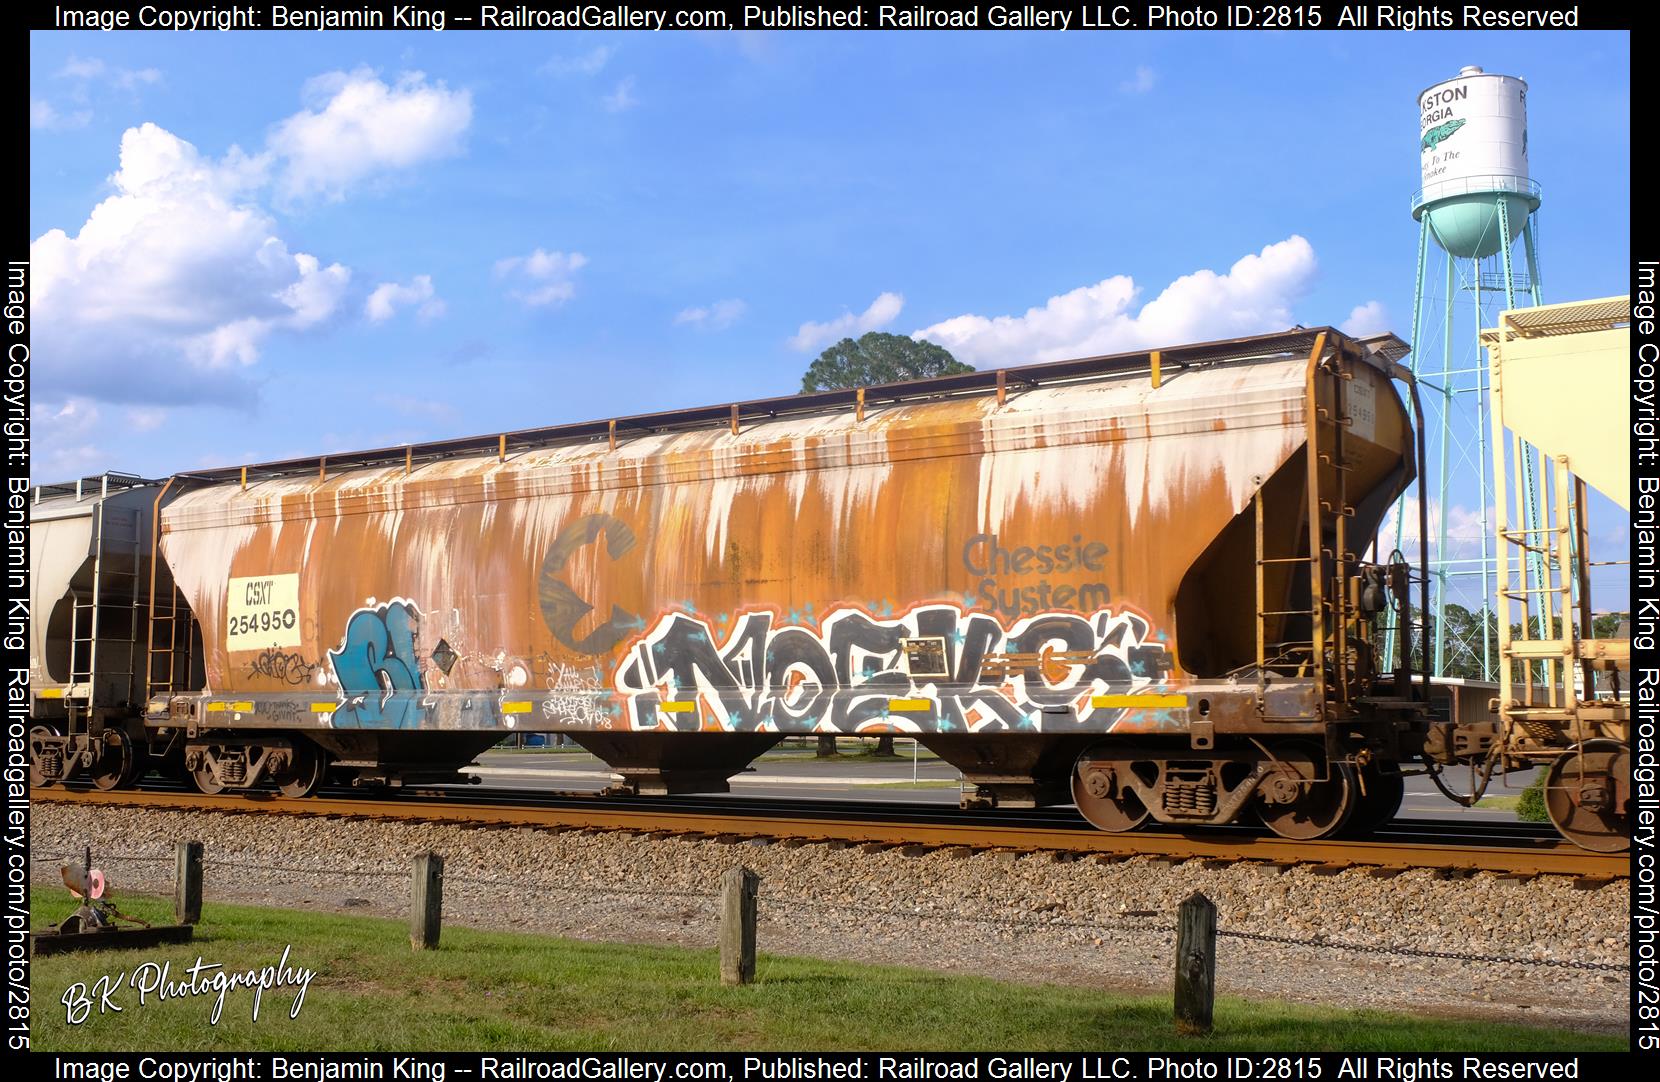 CSXT 254950 is a class 4600 Cu. Ft. ACF Covered Hopper and  is pictured in Folkston, Georgia, USA.  This was taken along the CSXT Nahunta Subdivision on the CSX Transportation. Photo Copyright: Benjamin King uploaded to Railroad Gallery on 12/29/2023. This photograph of CSXT 254950 was taken on Friday, June 10, 2022. All Rights Reserved. 